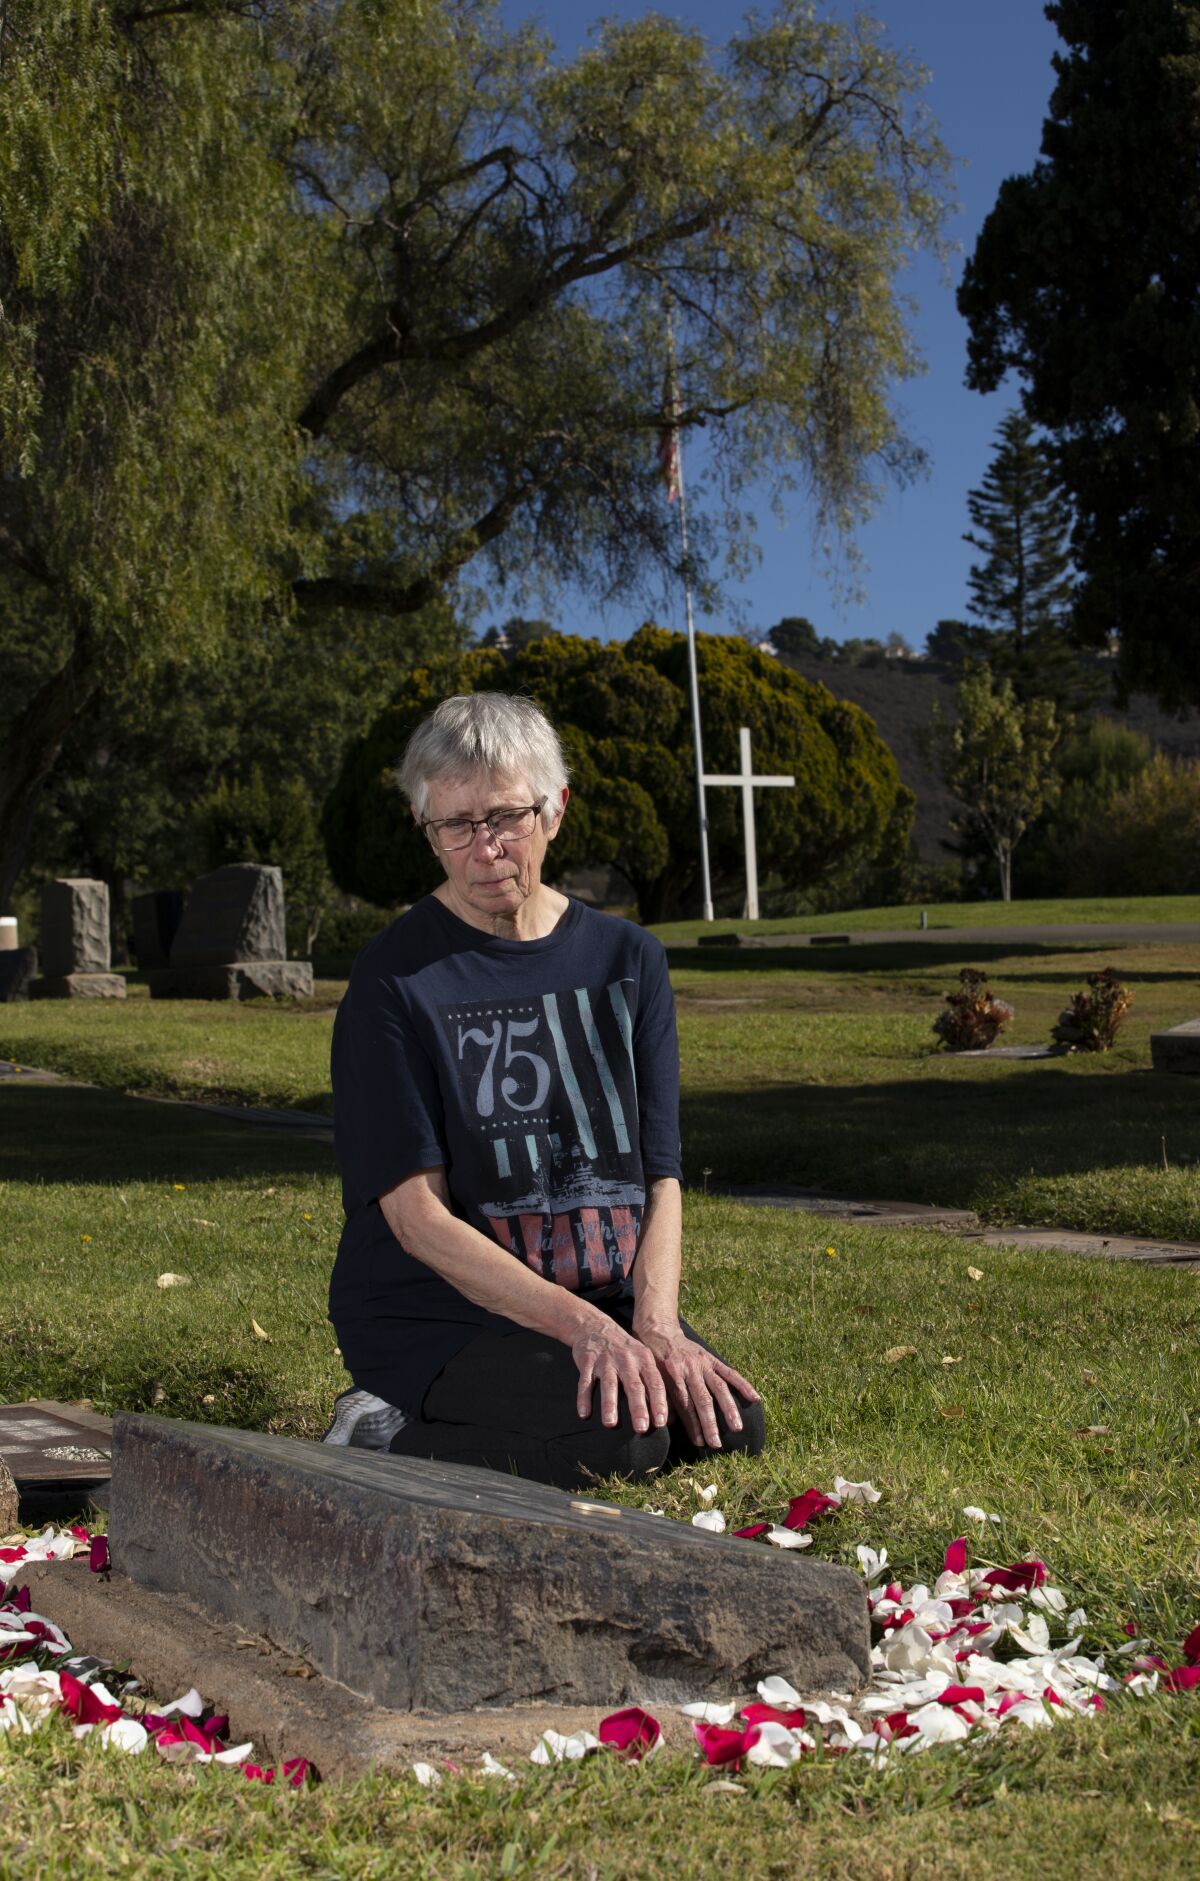 Linda Dudik at the grave of Seaman 2nd Class Gordon Stafford at the in San Marcos Cemetery.